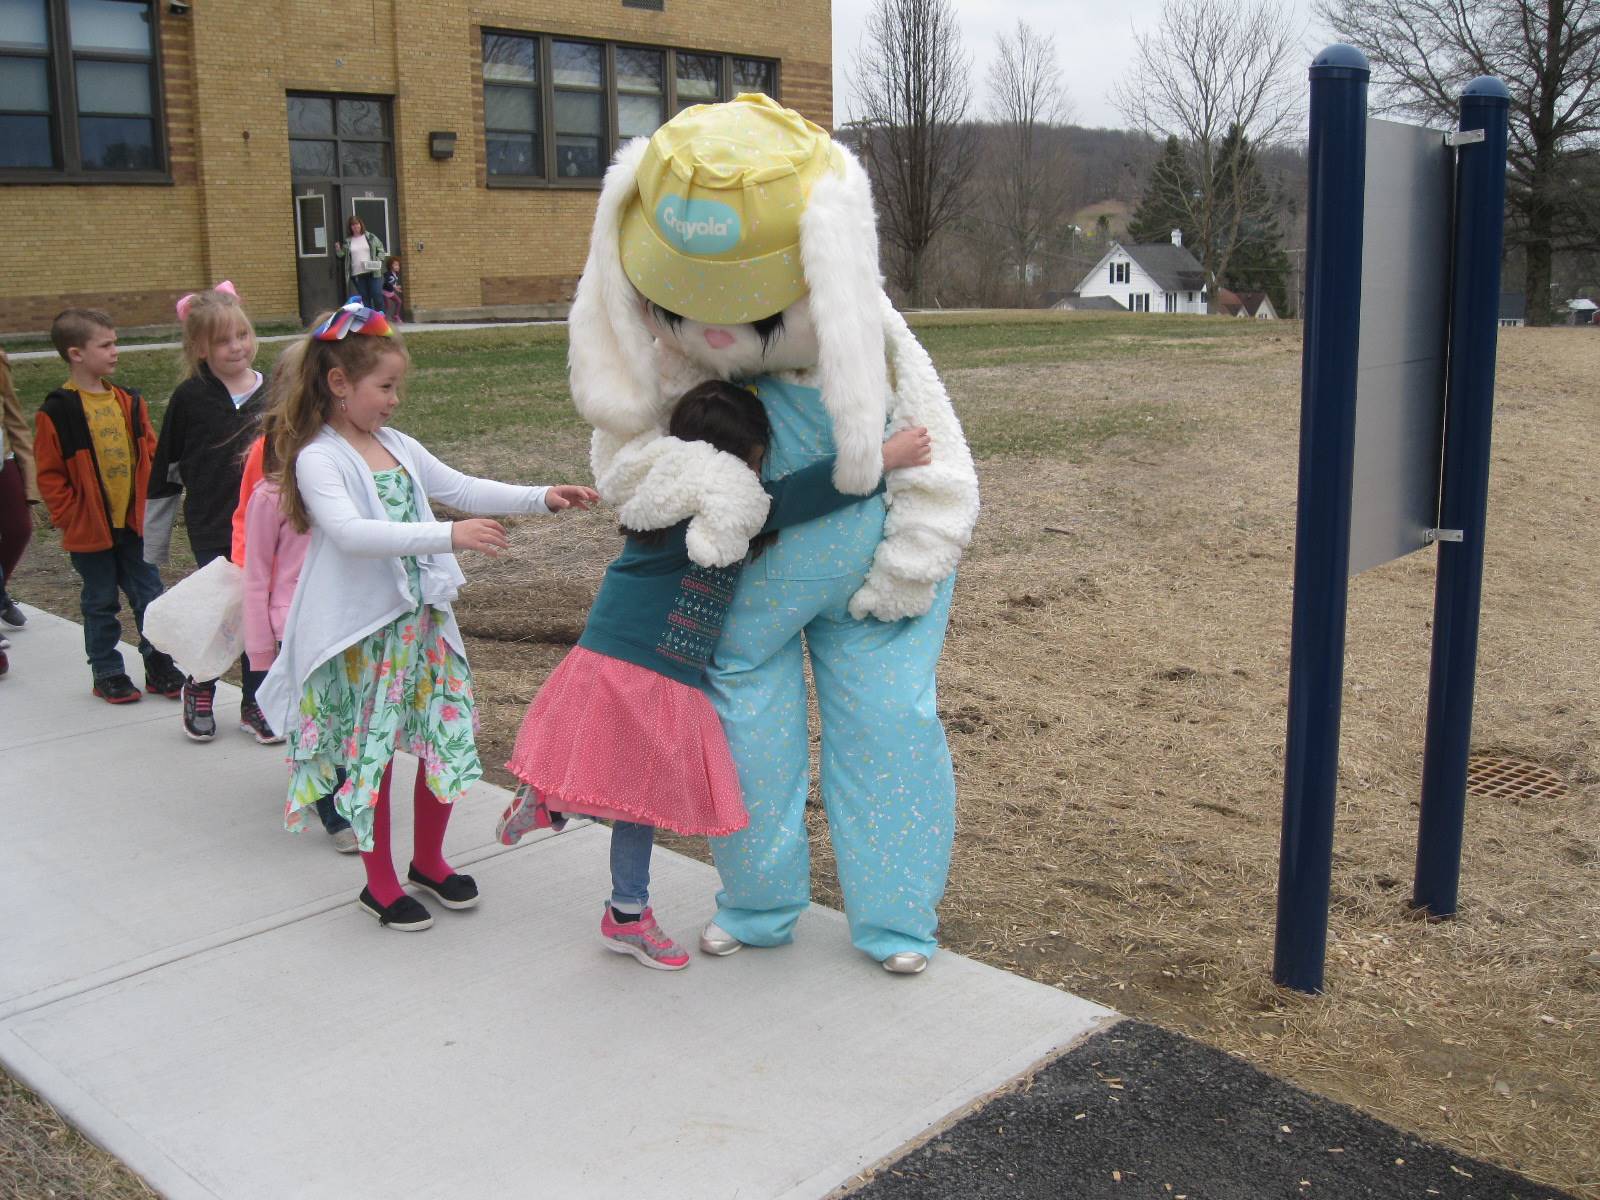 Students get a surprise greeting from Easter Bunny outside.